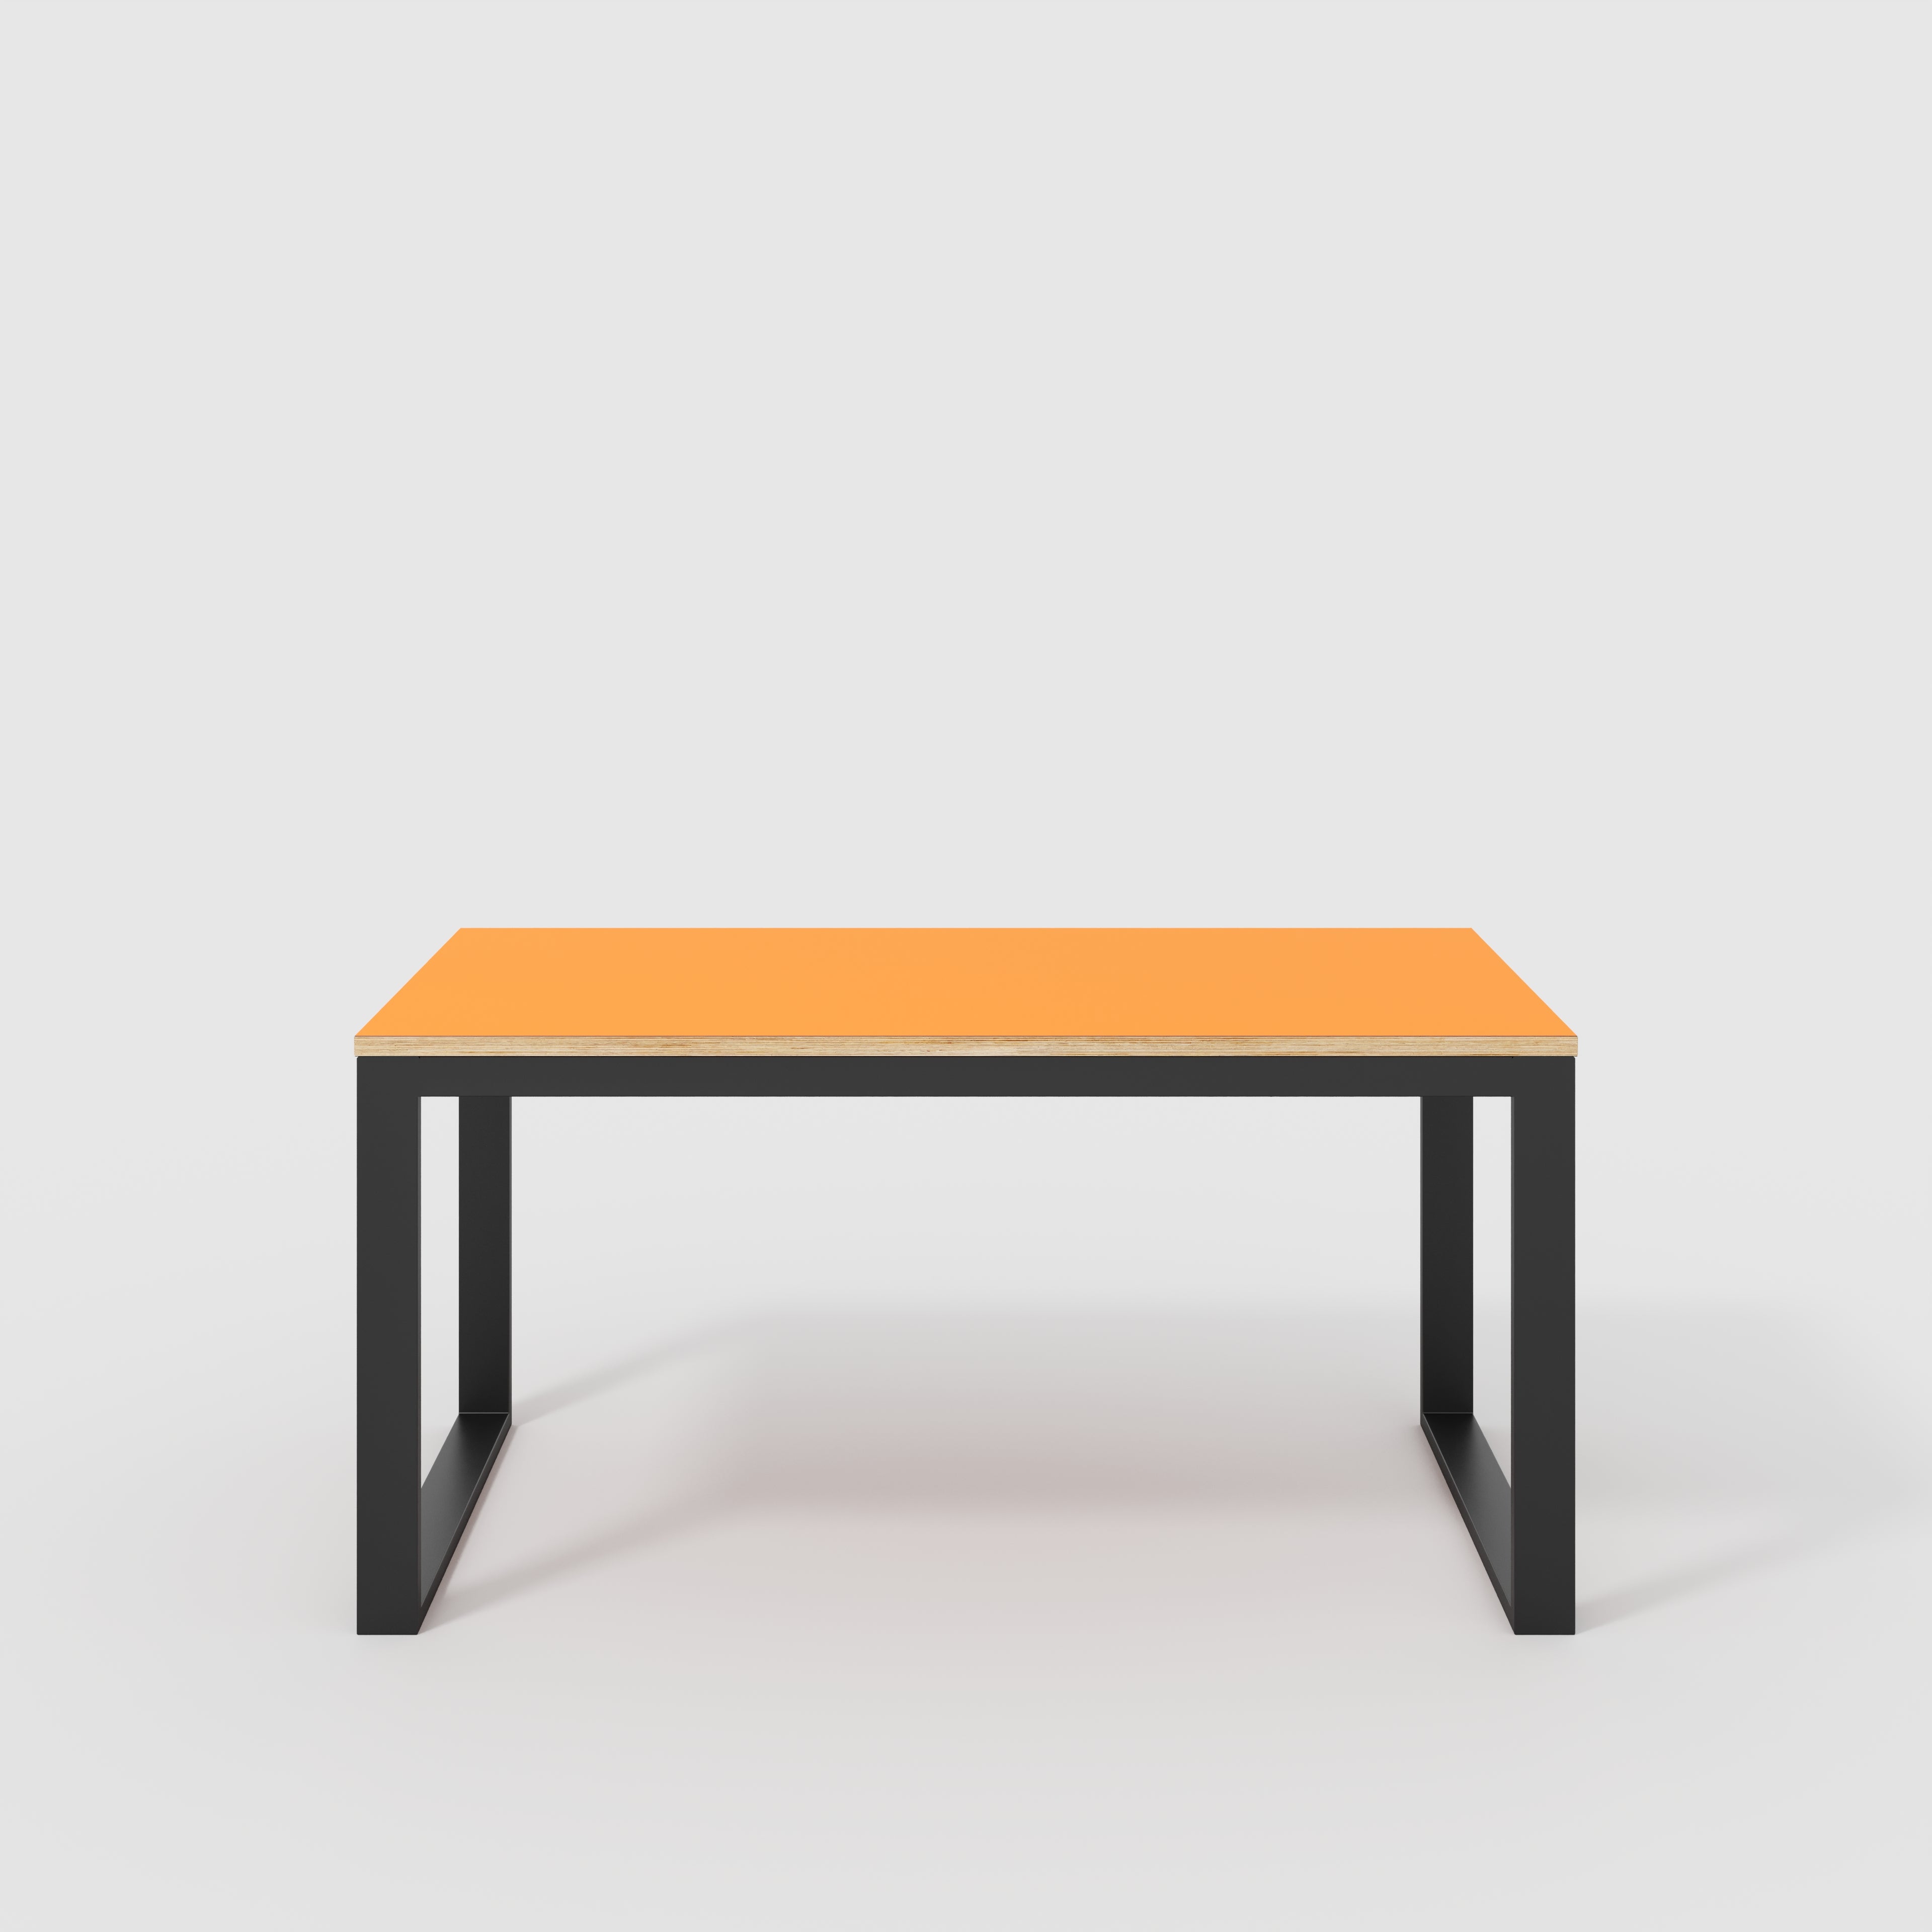 Table with Black Industrial Frame - Formica Levante Orange - 1500(w) x 745(d)